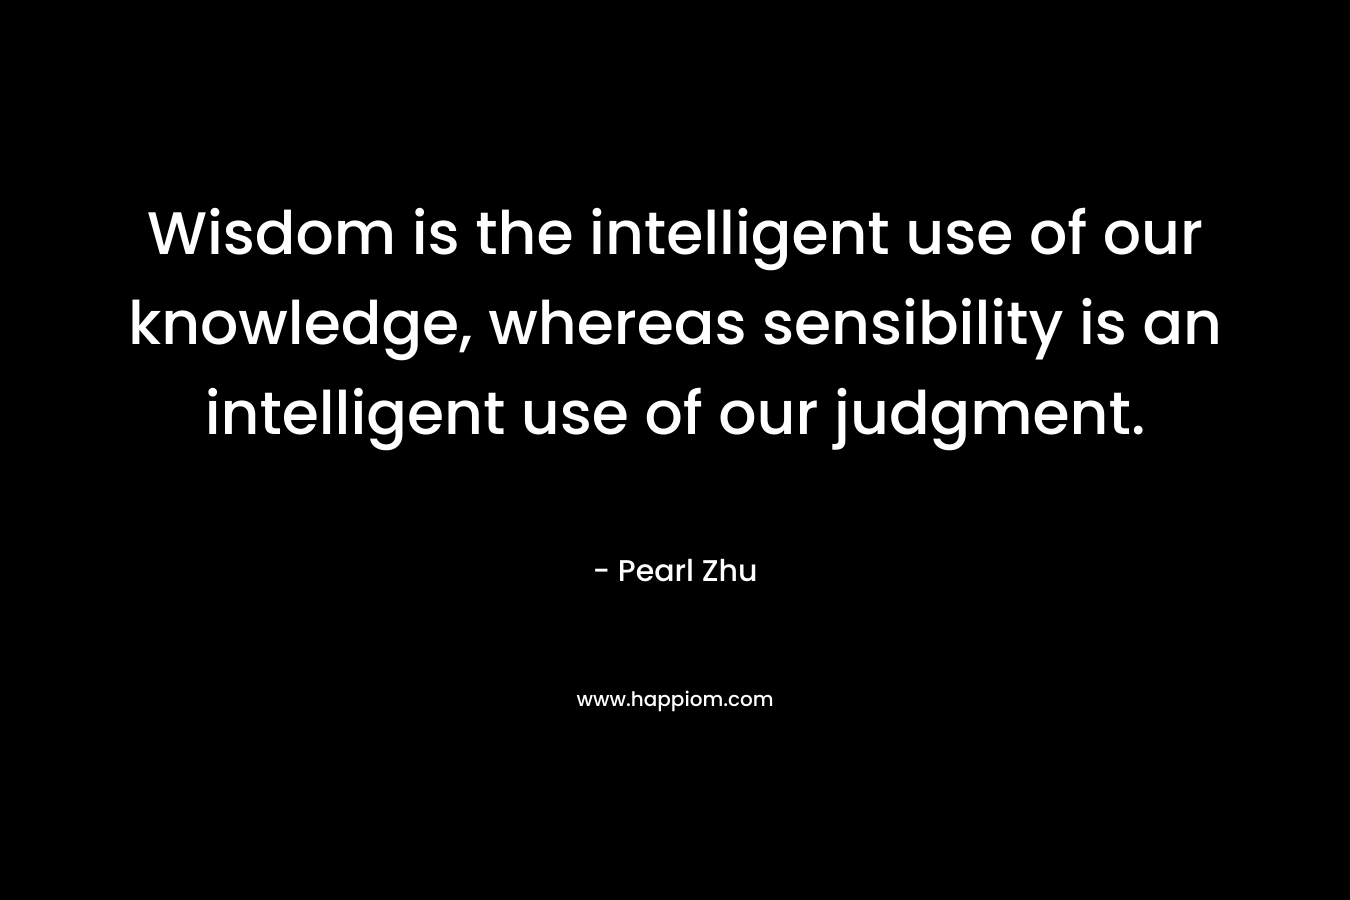 Wisdom is the intelligent use of our knowledge, whereas sensibility is an intelligent use of our judgment.